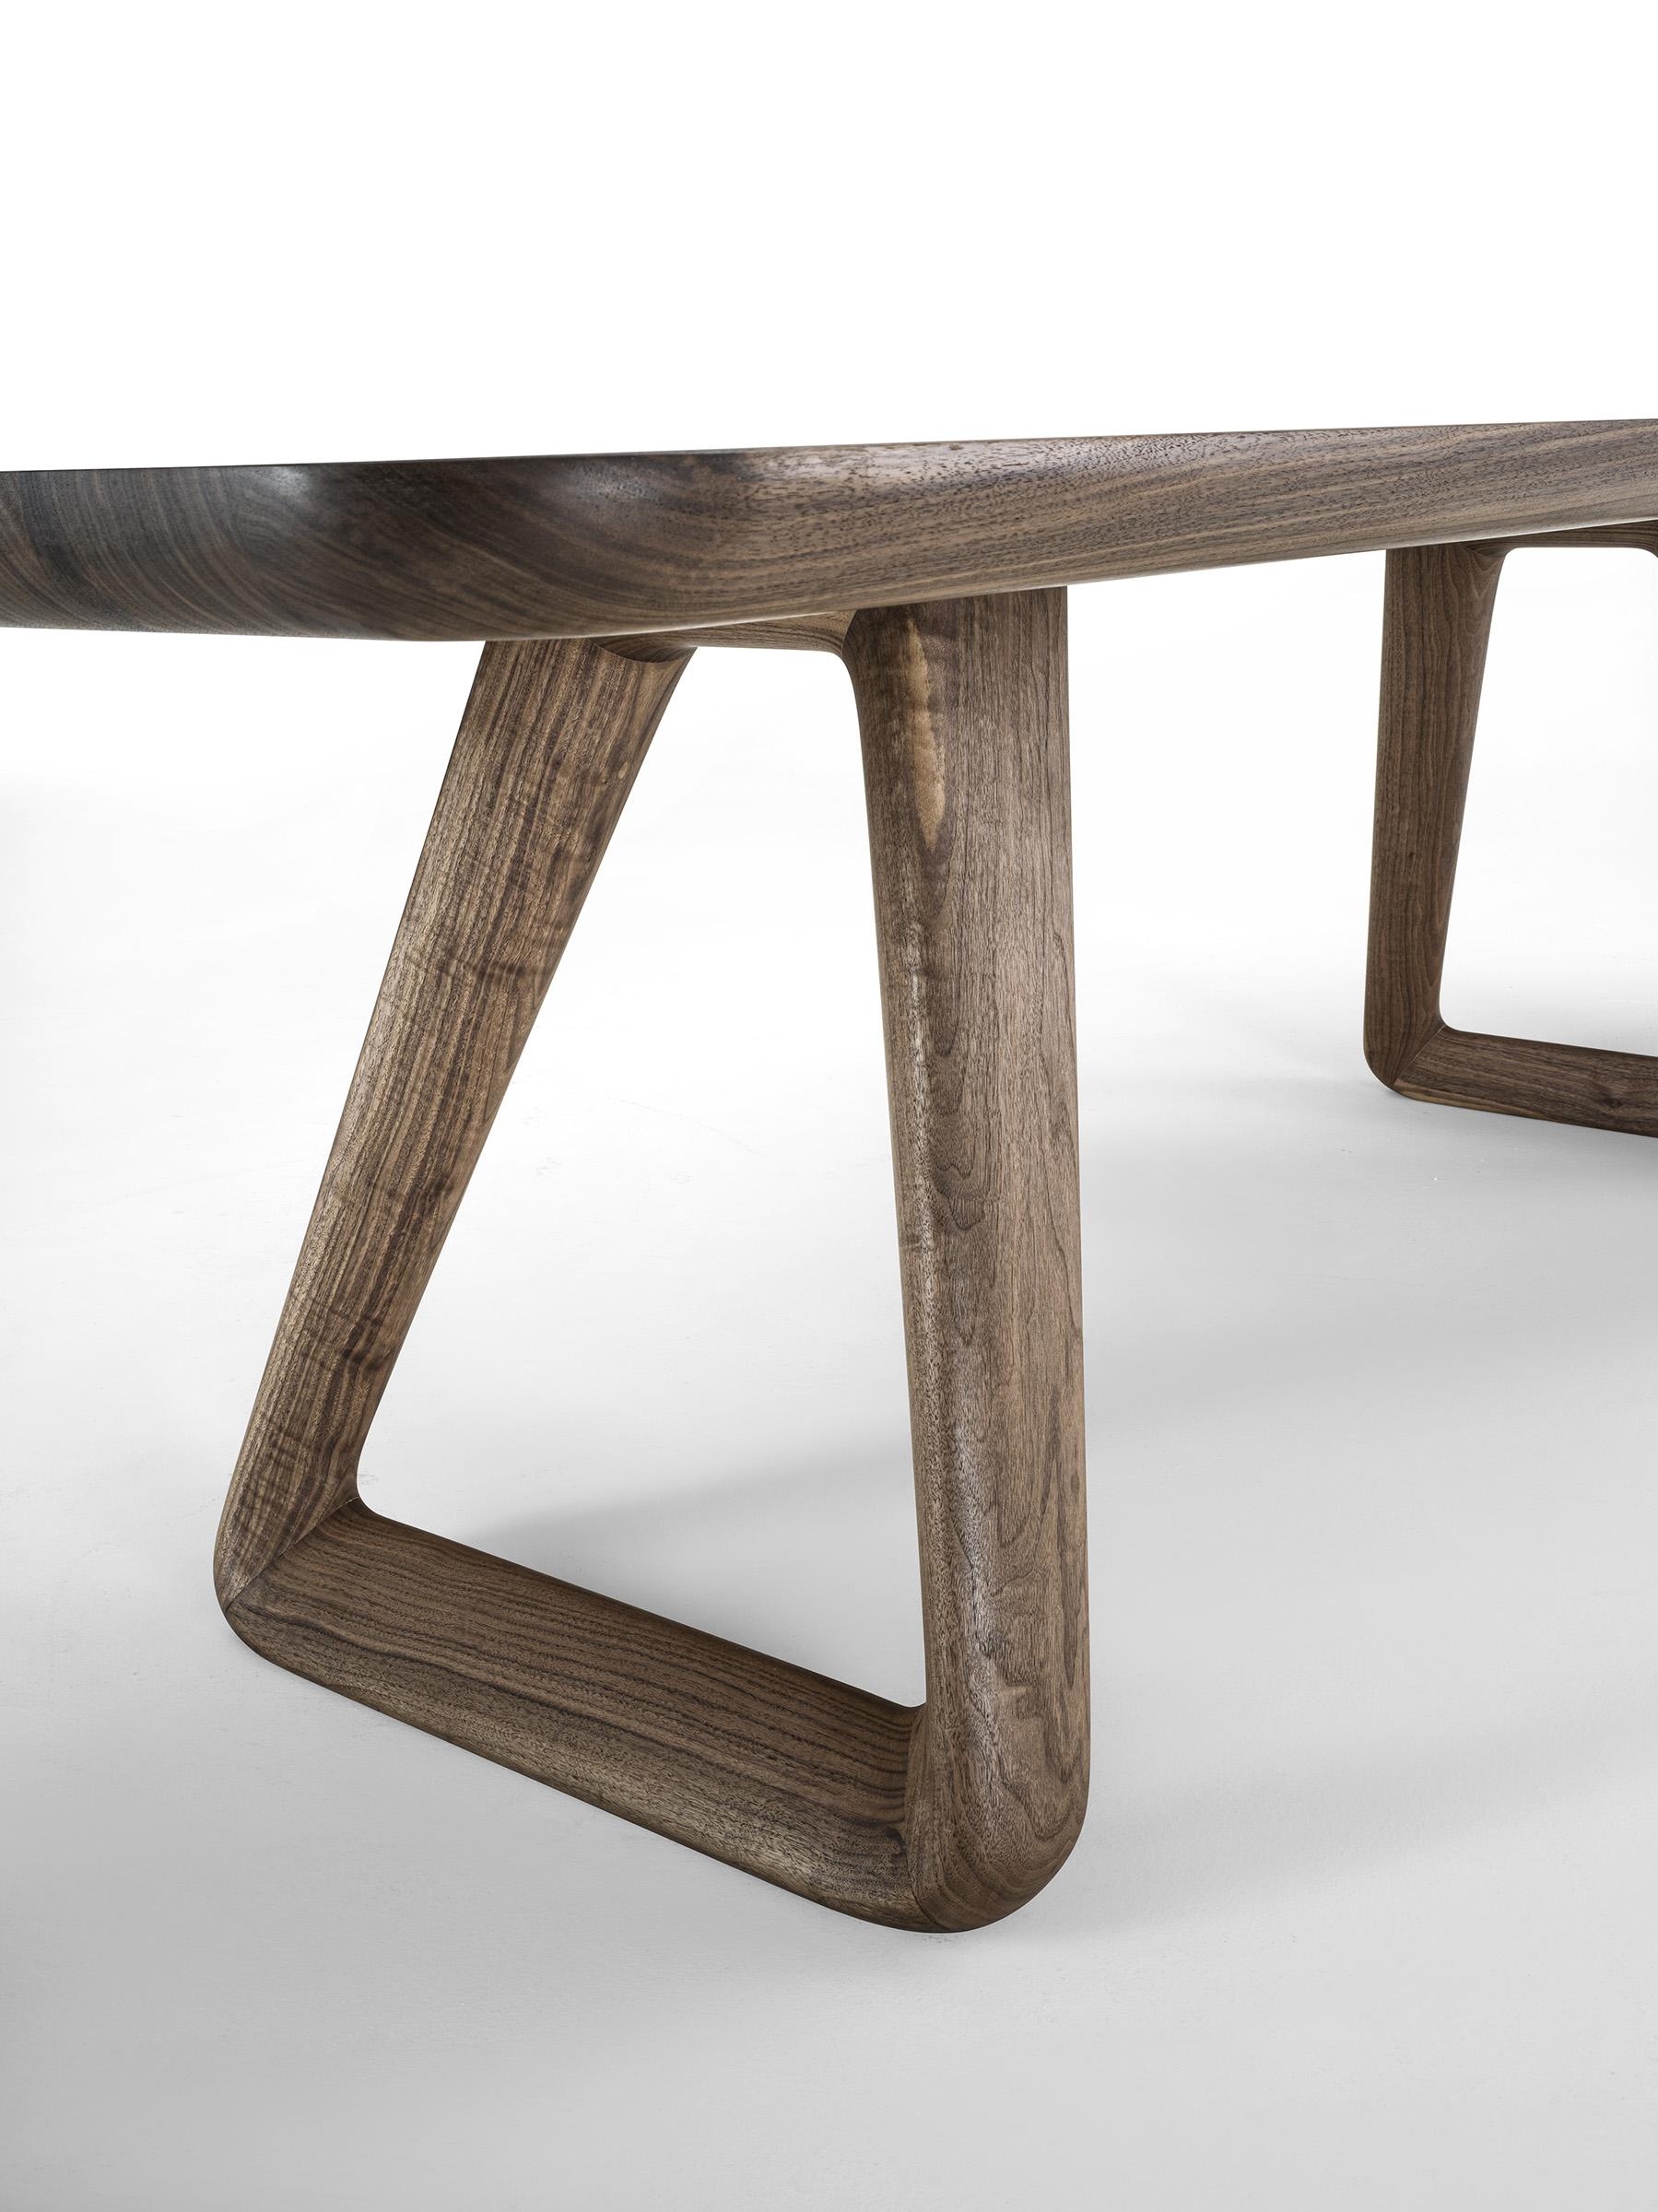 Sospiro Wood Dining Table, Designed by Claudio Bellini, Made in Italy For Sale 2